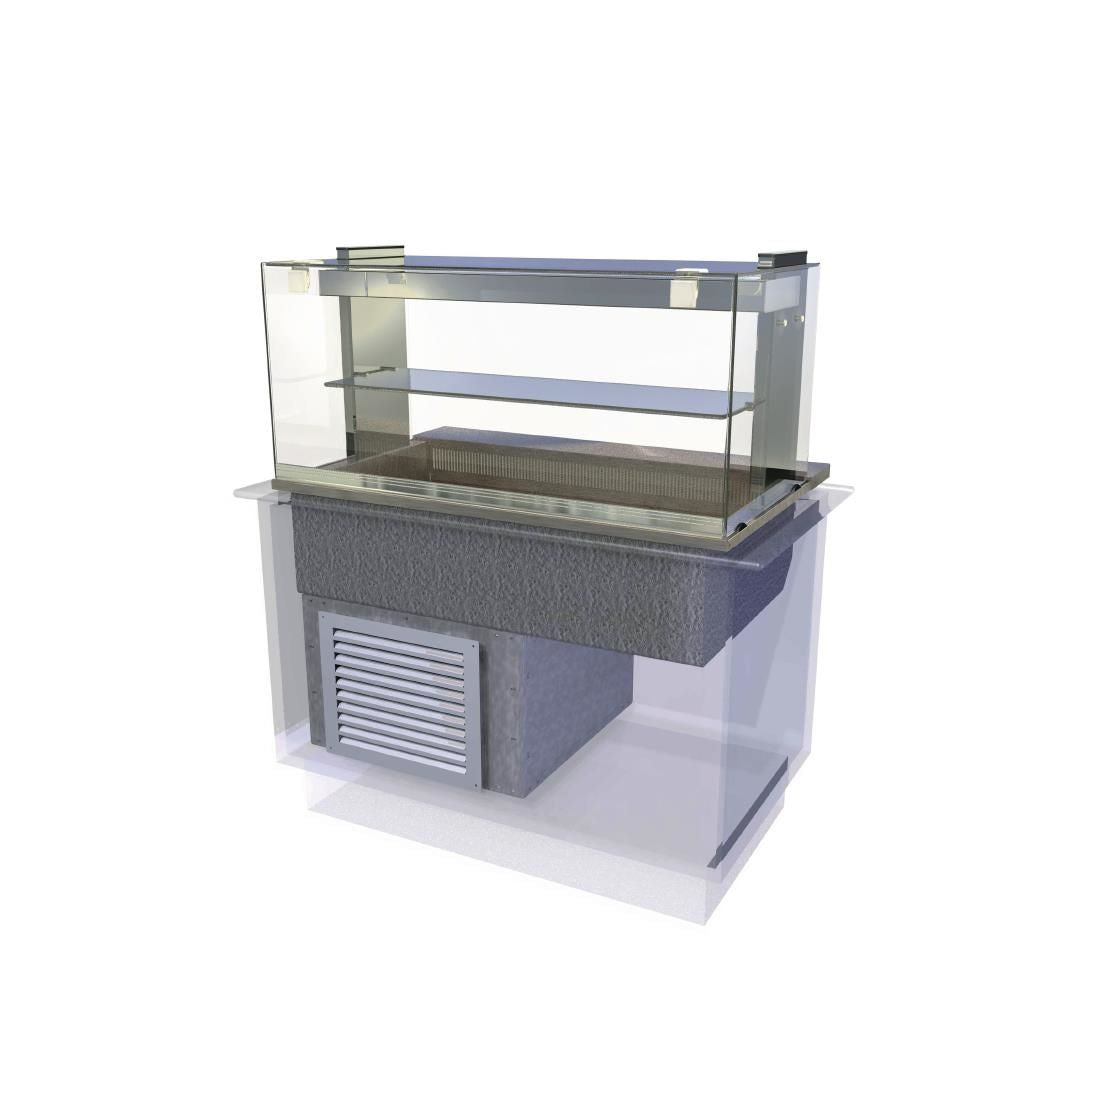 CW627 Kubus Drop In Chilled Deli Serve Over Counter 1525mm KCDL4HT JD Catering Equipment Solutions Ltd